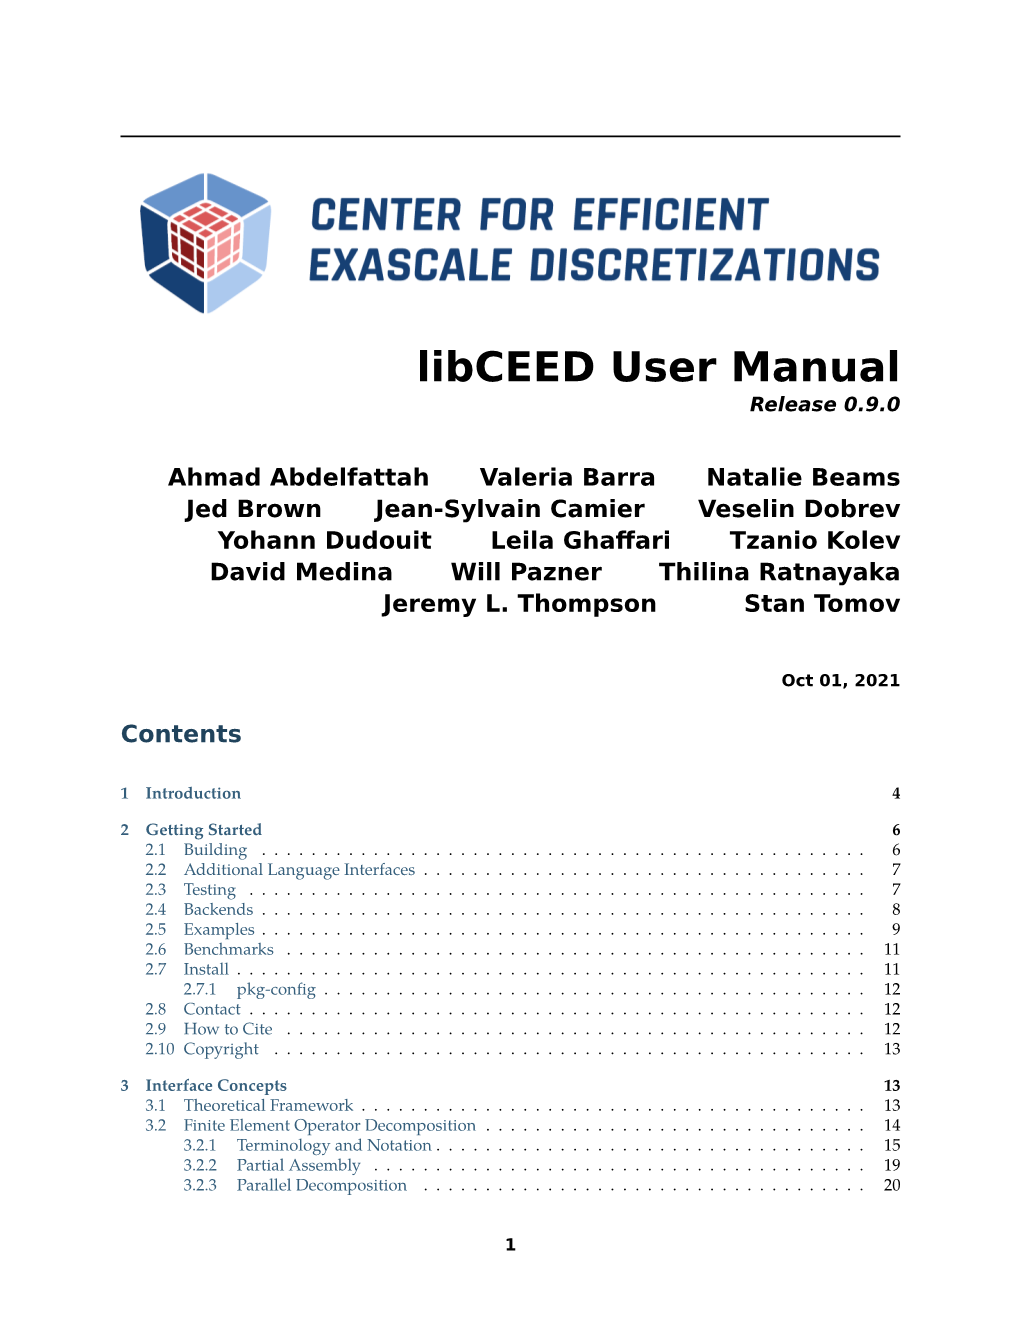 Libceed User Manual Release 0.9.0